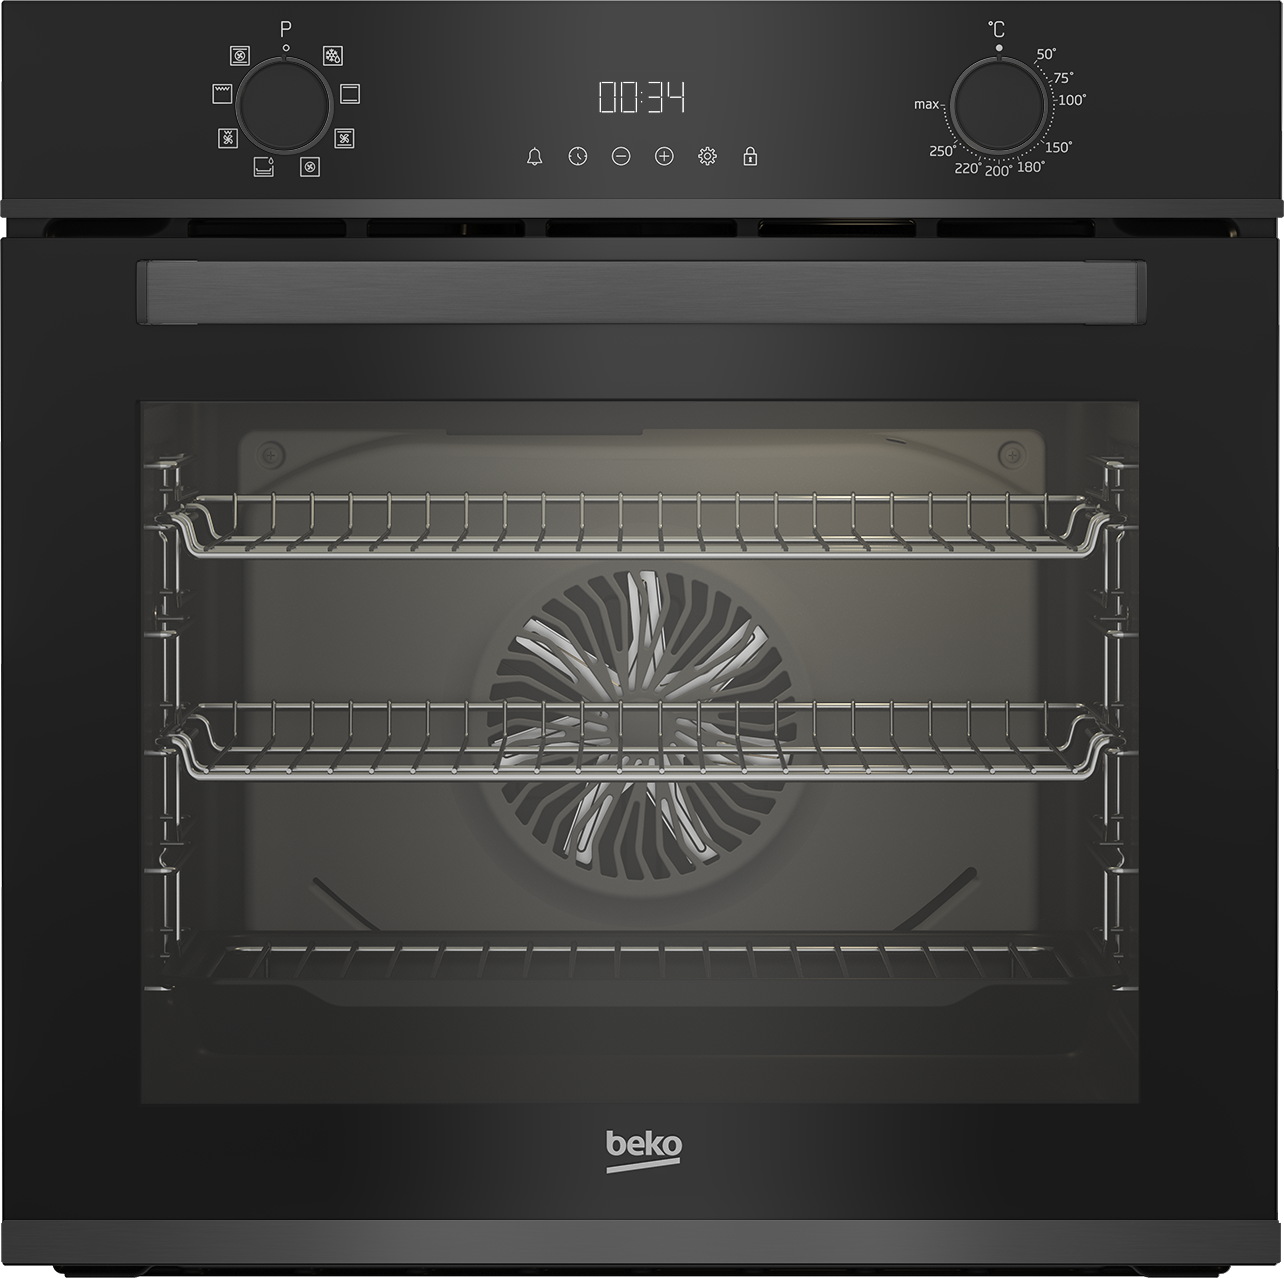 Beko AeroPerfect RecycledNet BBXIM17300DX Built In Electric Single Oven - Dark Steel - A Rated, Stainless Steel